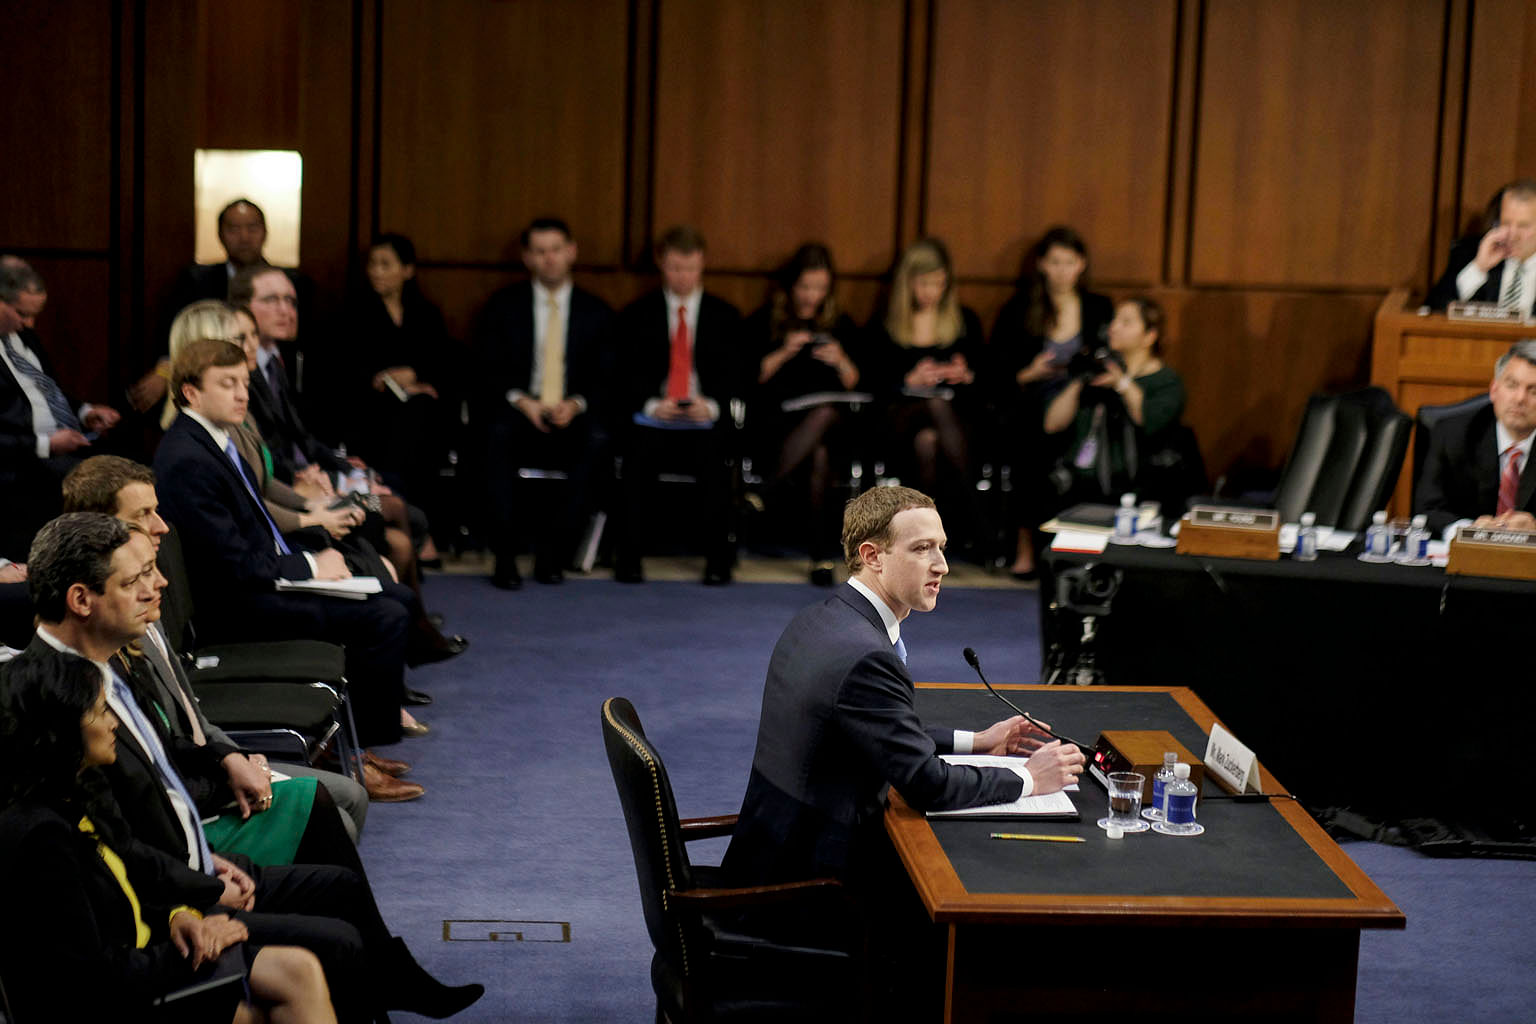 Facebook CEO Mark Zuckerberg at a Senate hearing in Washington this week. Privacy advocates want US lawmakers and regulators to have a pointed discussion about the stockpiling of personal data at the core of the giant social media company's business.